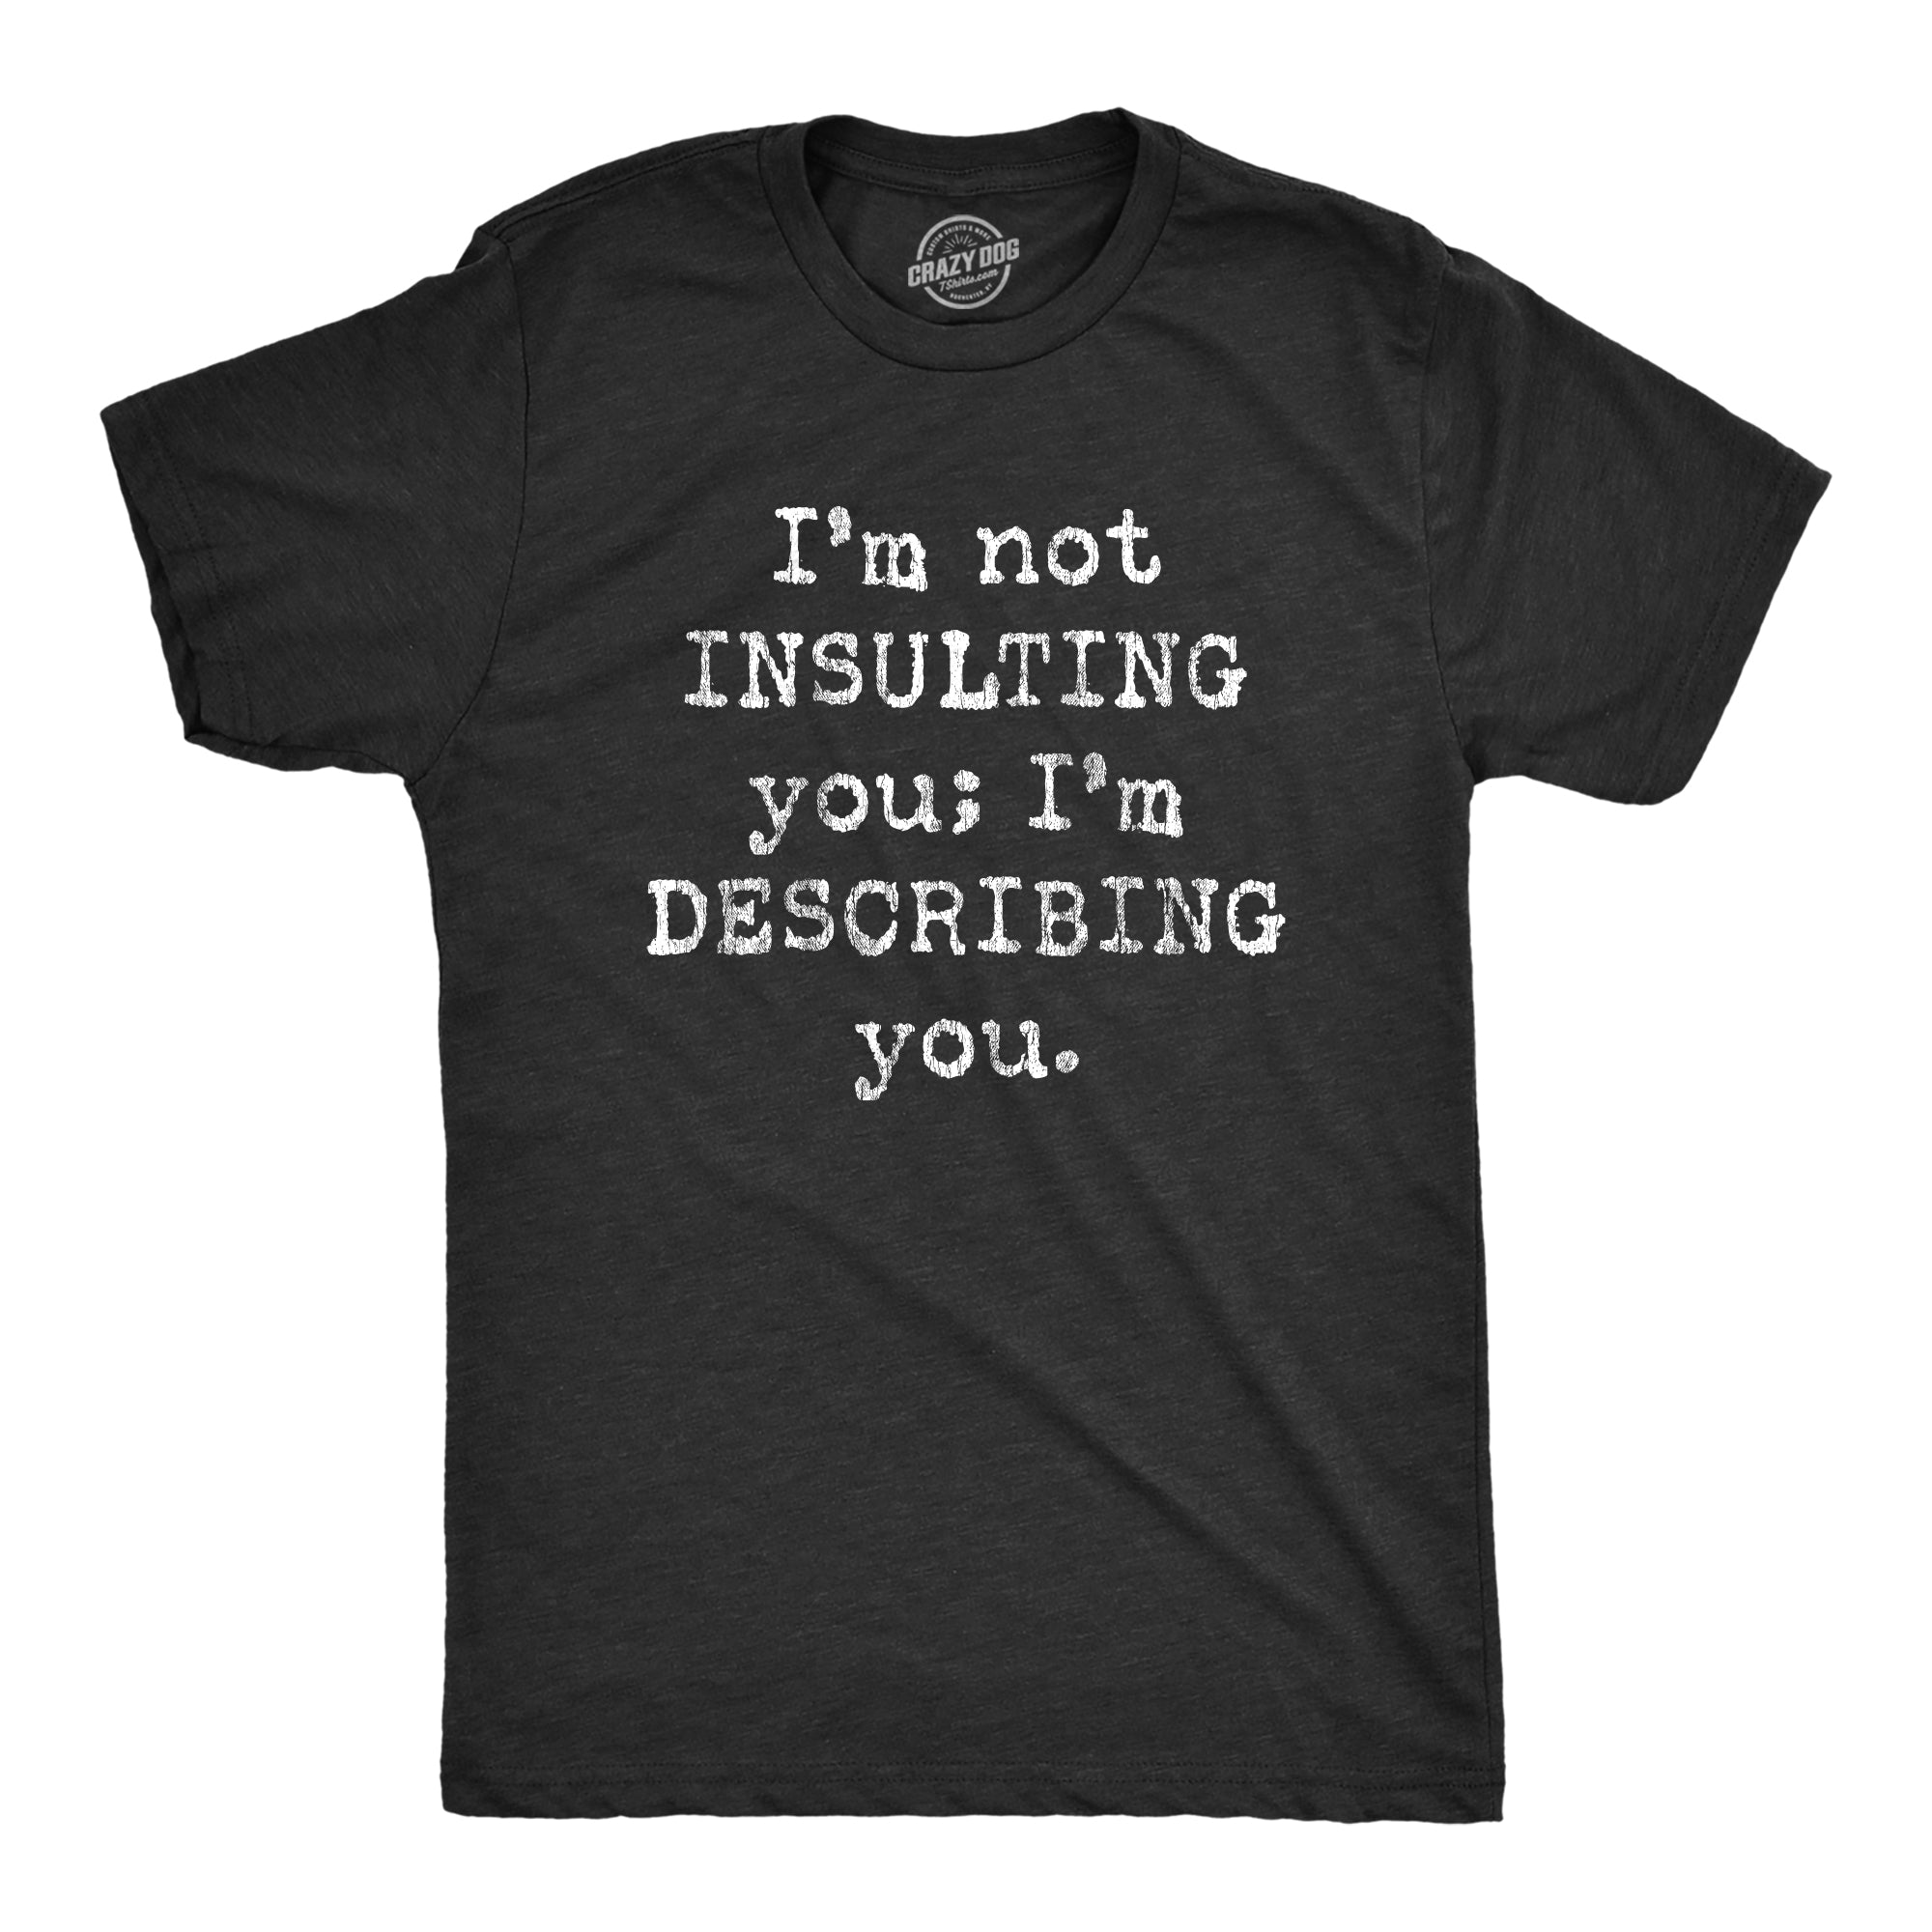 Funny Heather Black I'm Not Insulting You I'm Describing You Mens T Shirt Nerdy Sarcastic Tee